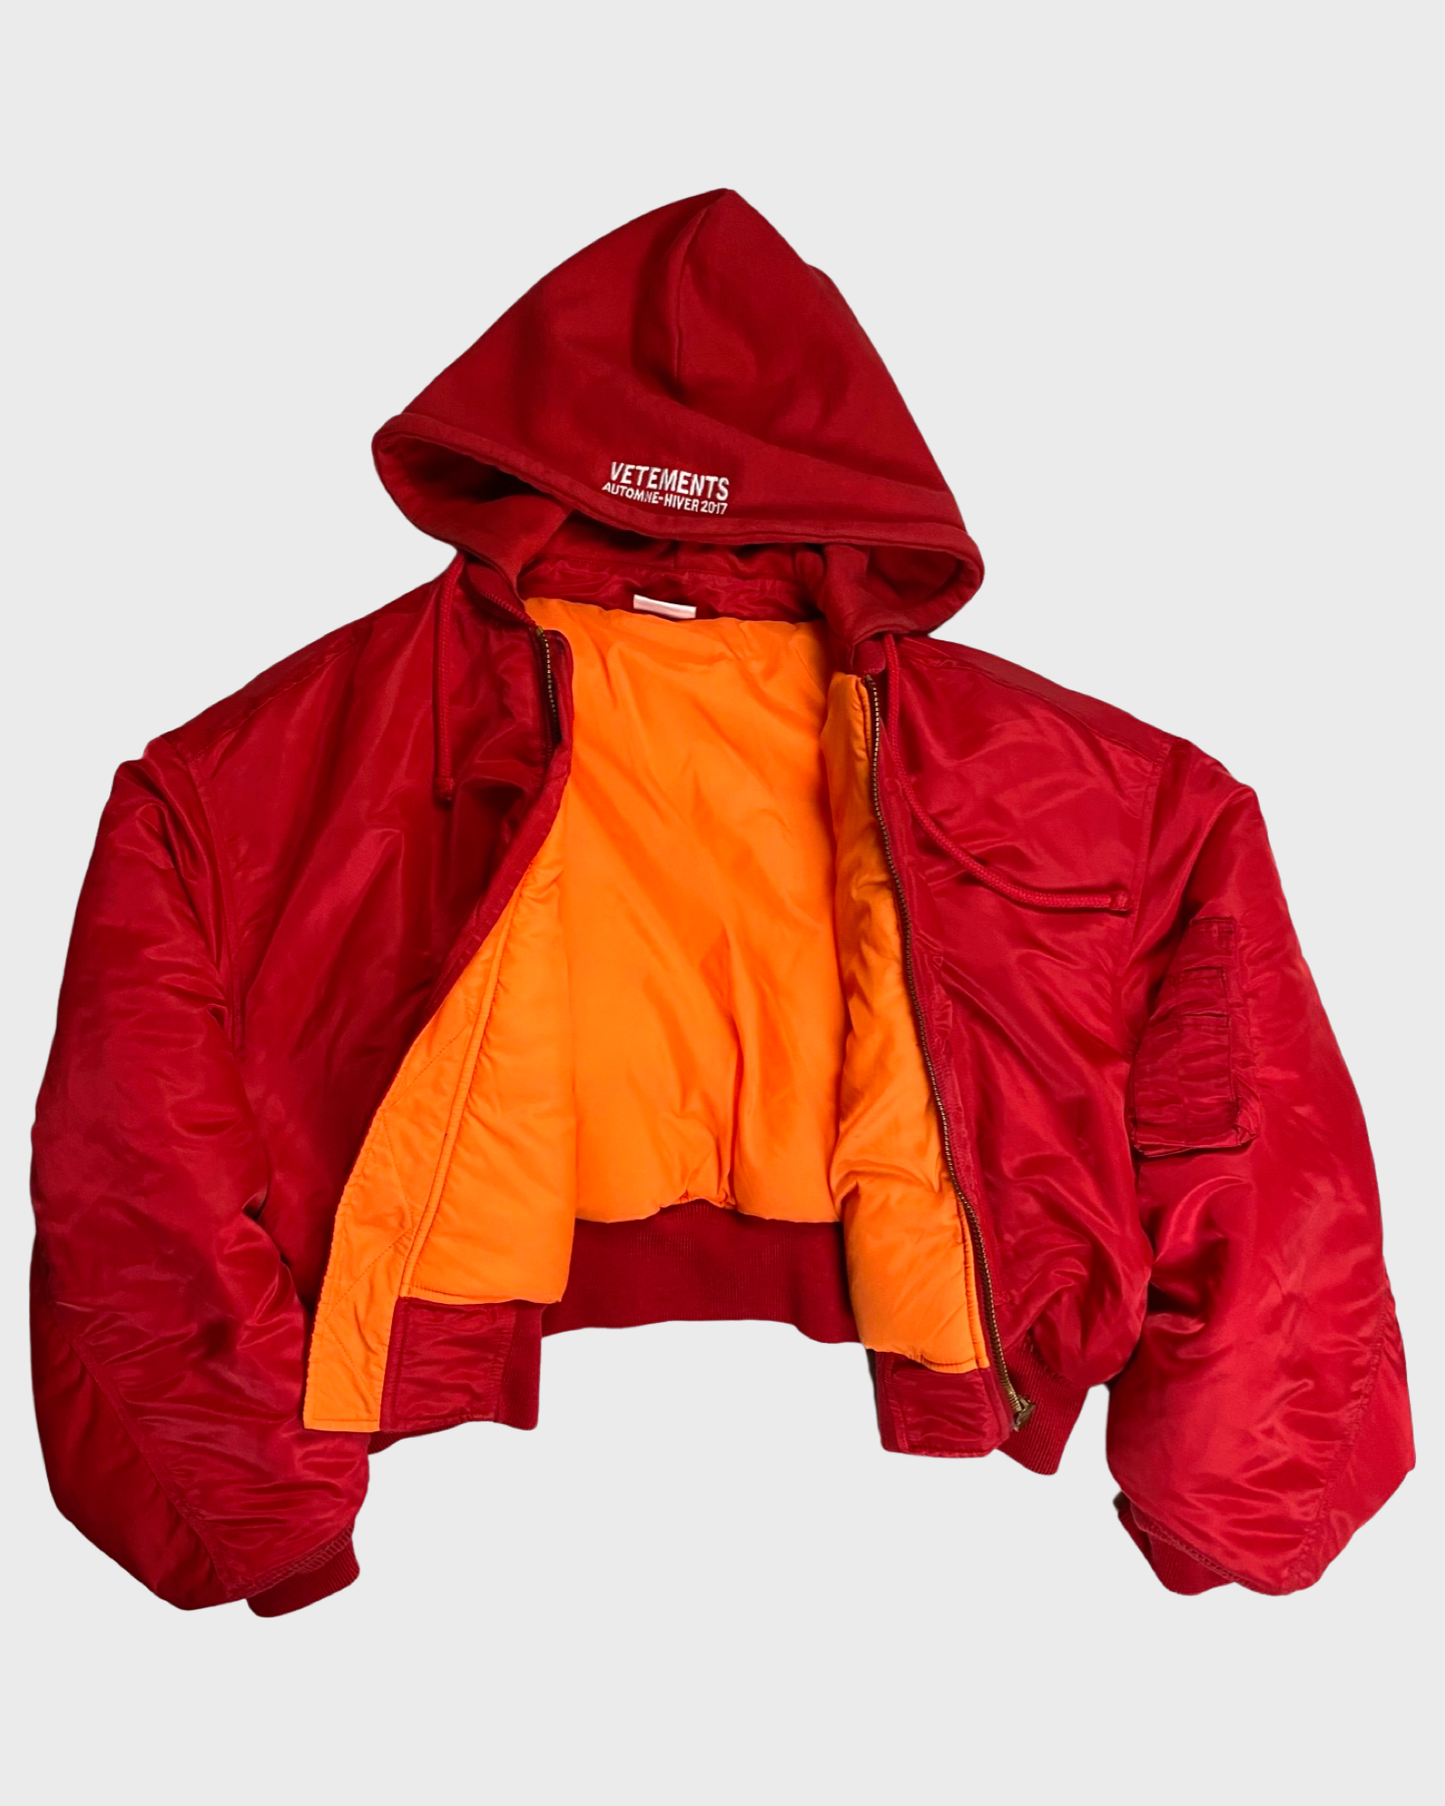 Vetements AW16 cropped red Bomber MA1 jacket SZ: S